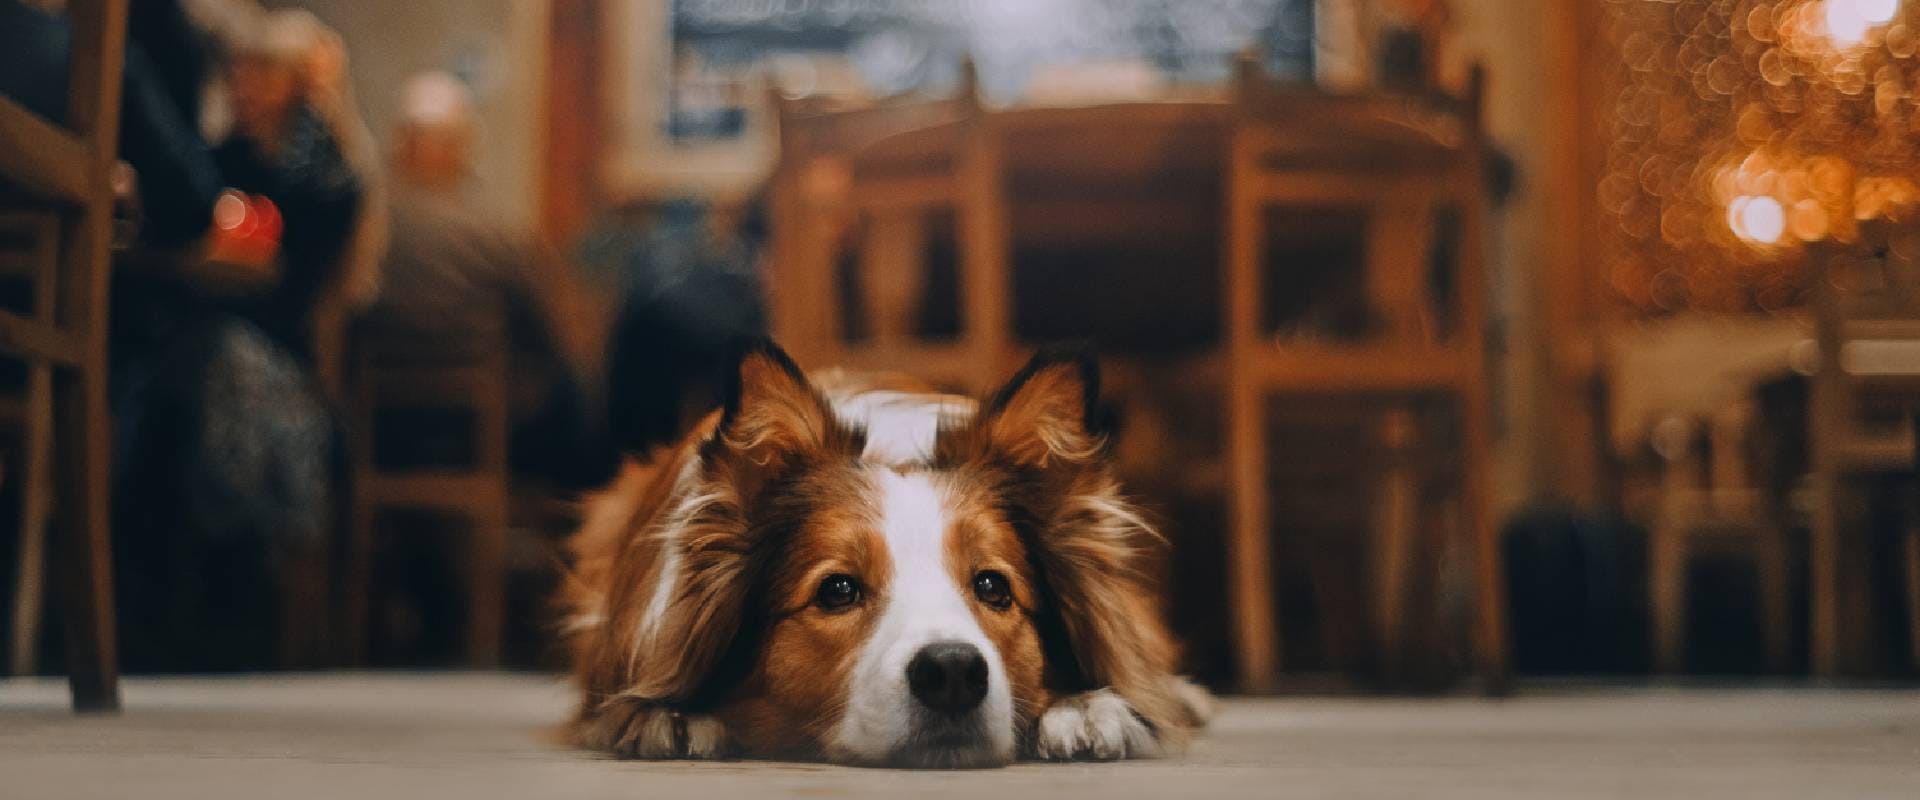 Red border collie dog lying on the floor of a dog-friendly cafe